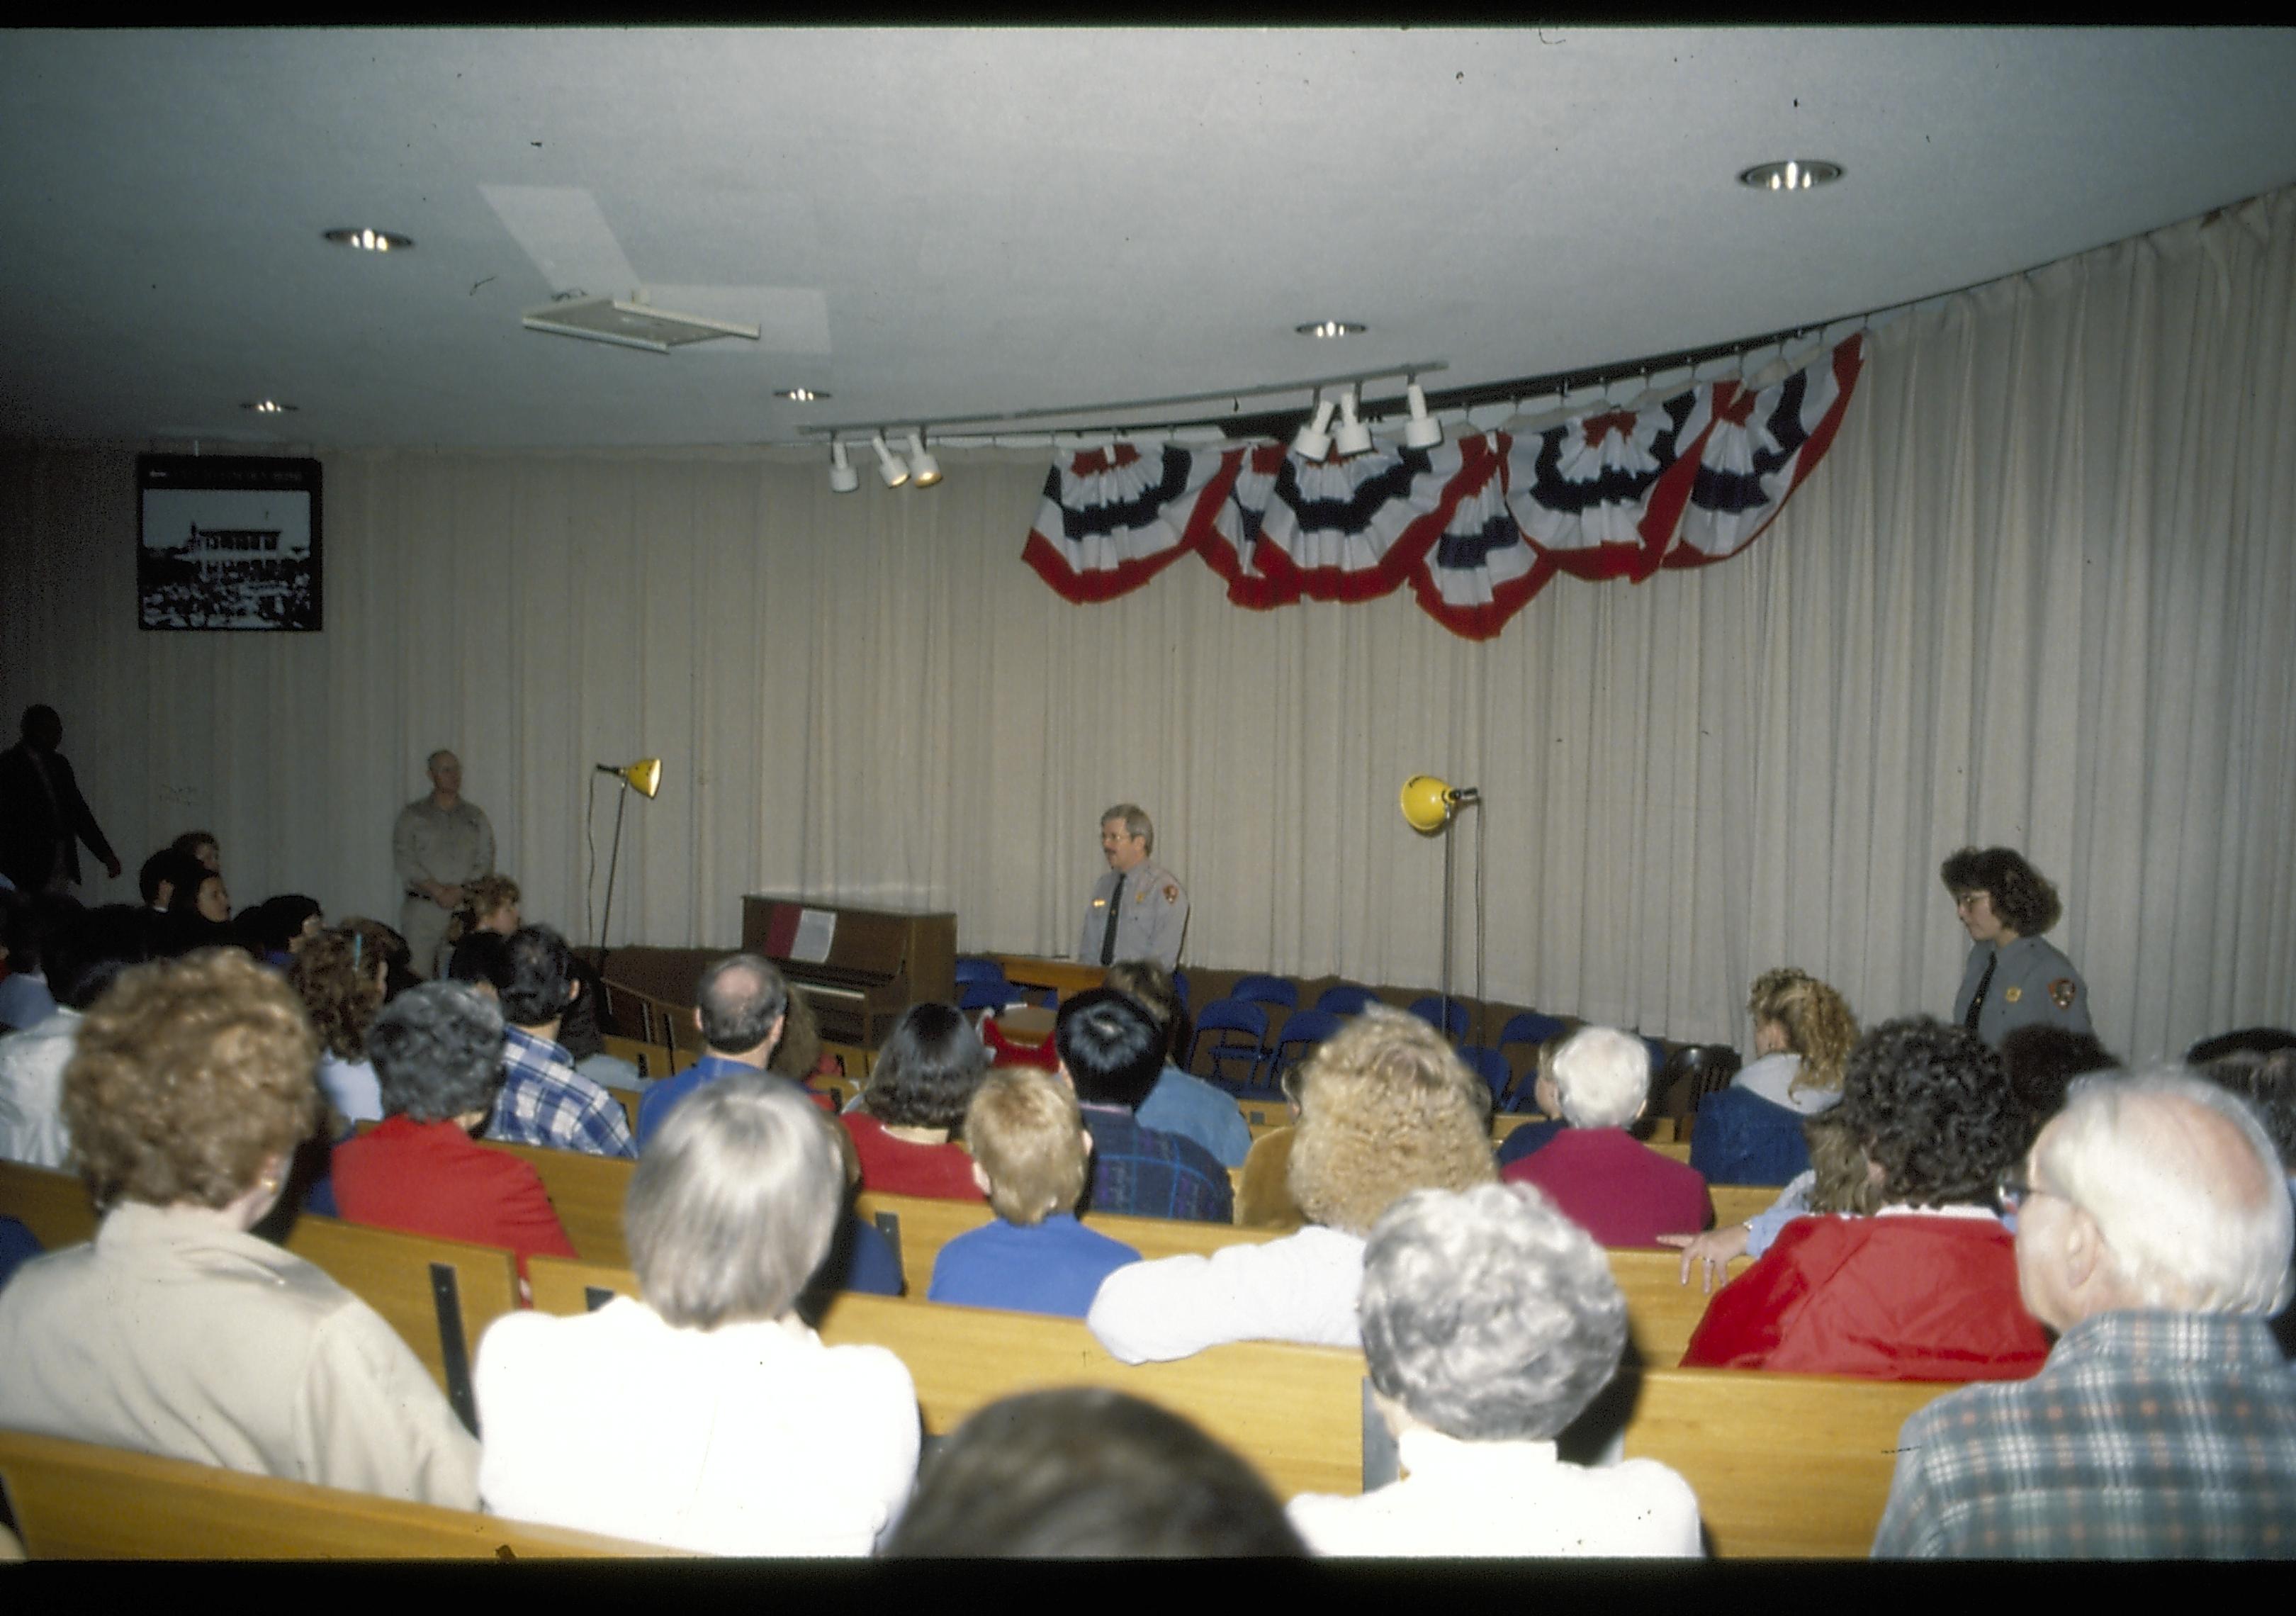 Ranger speaking from podium in theater one. Lincoln Home NHS- Lincoln's Birthday 1988 birthday, Lincoln, Douglas